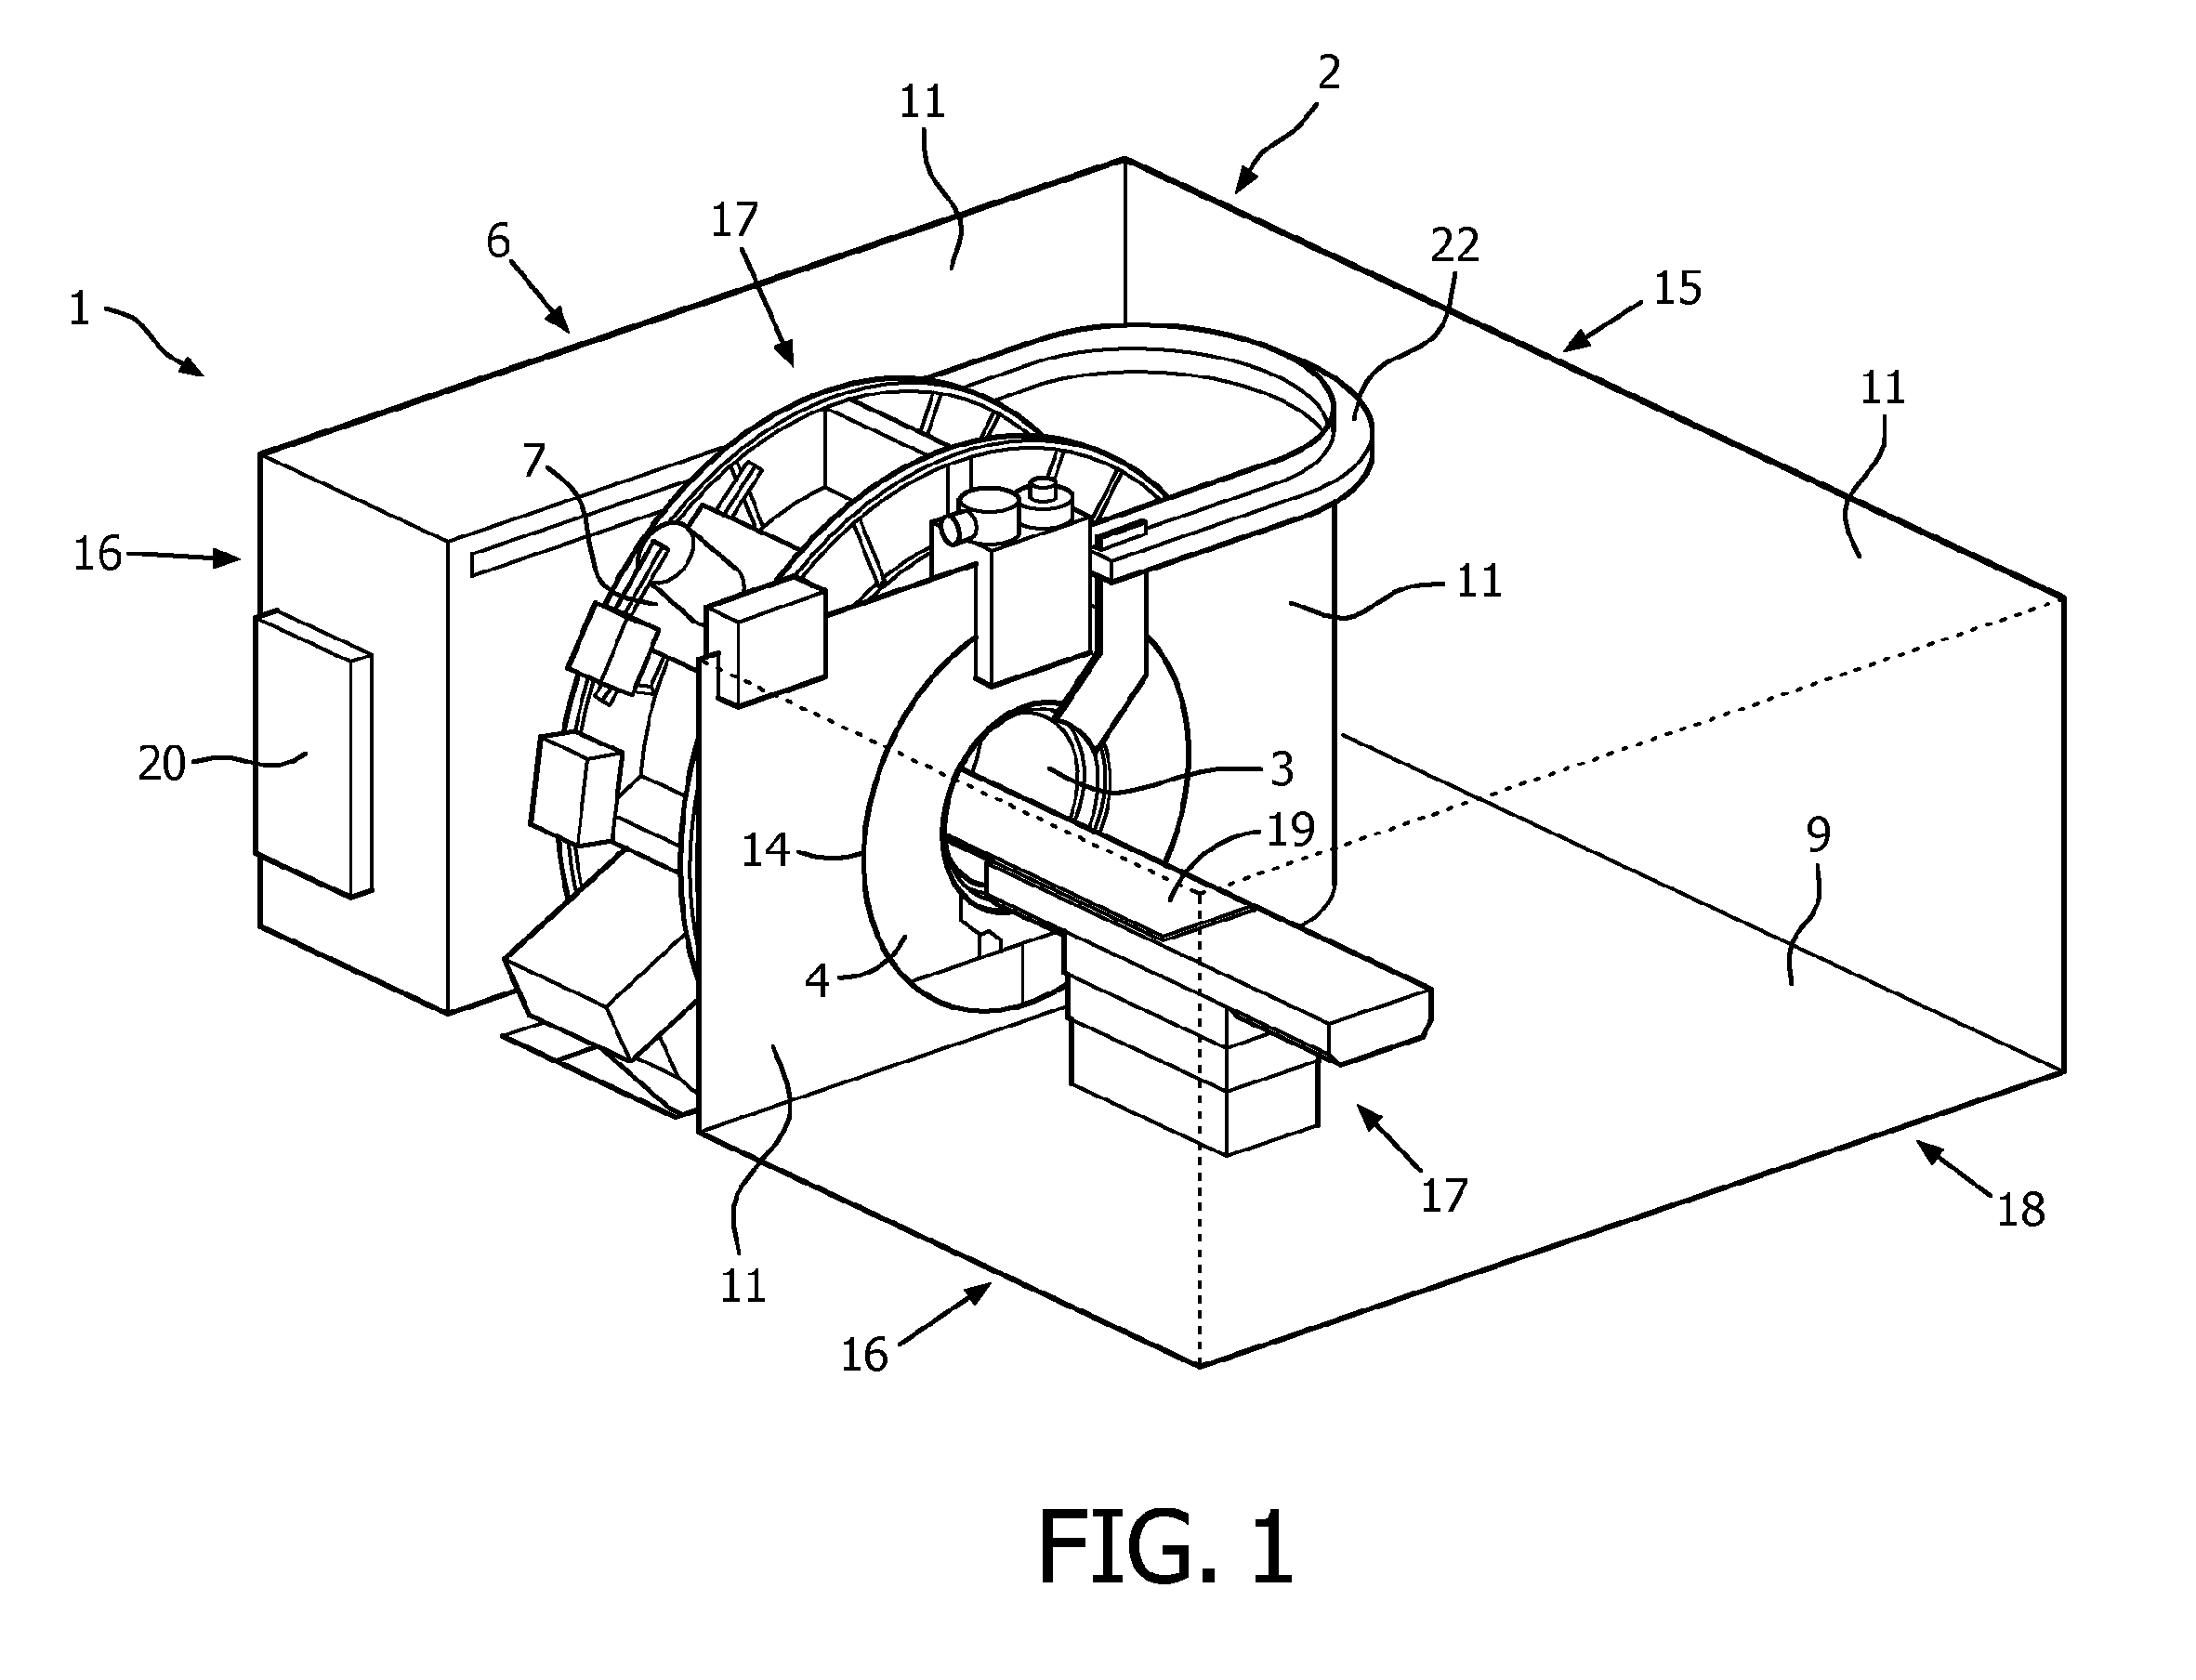 RF shielded exam room of a magnetic resonance imaging system